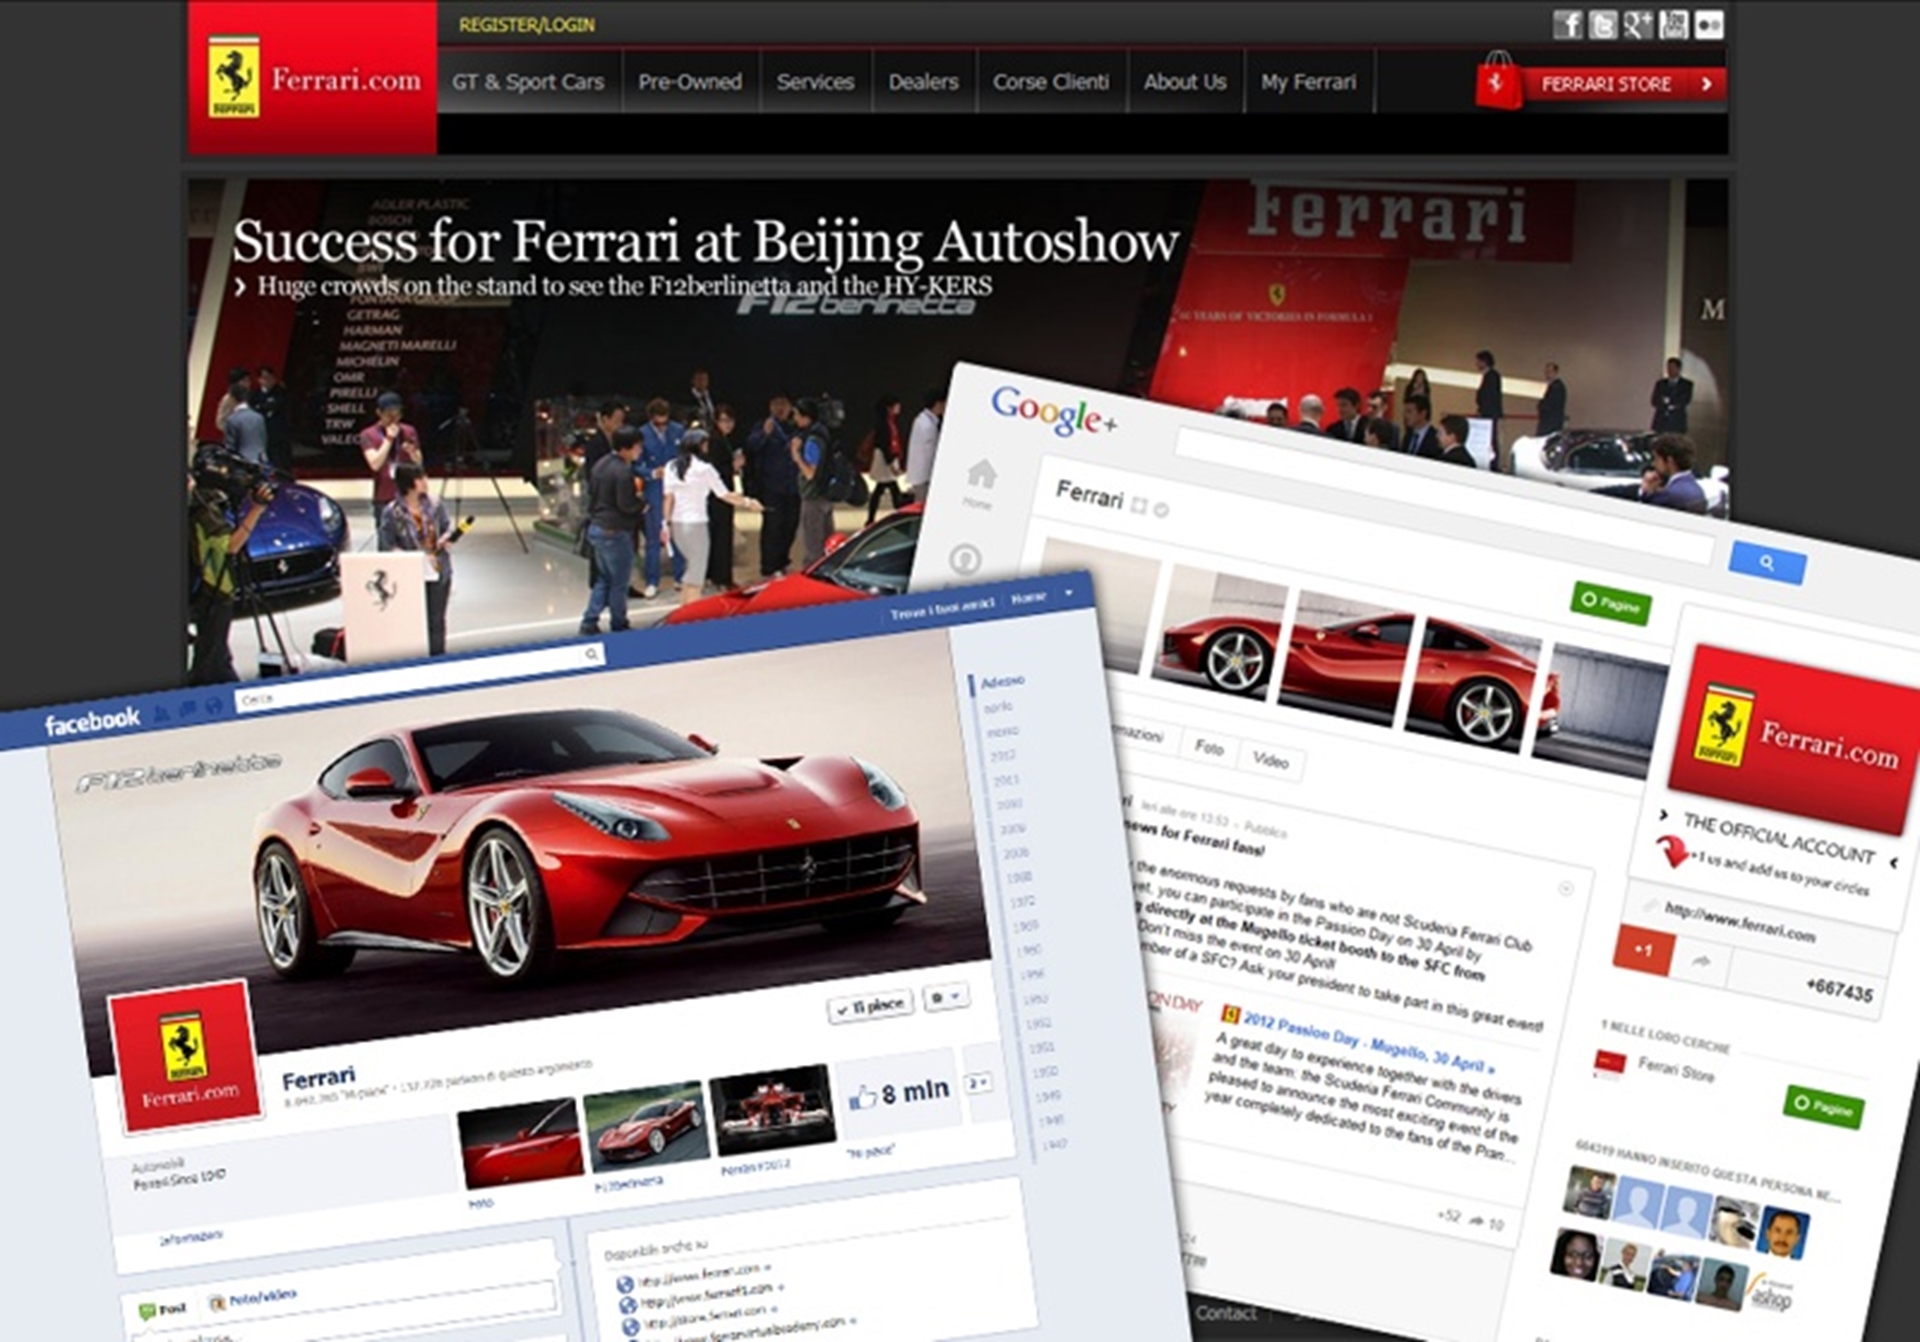 FERRARI IS A LEADER ON SOCIAL NETWORKS FIRST ON G+ AND 8 MILLION FANS ON FACEBOOK